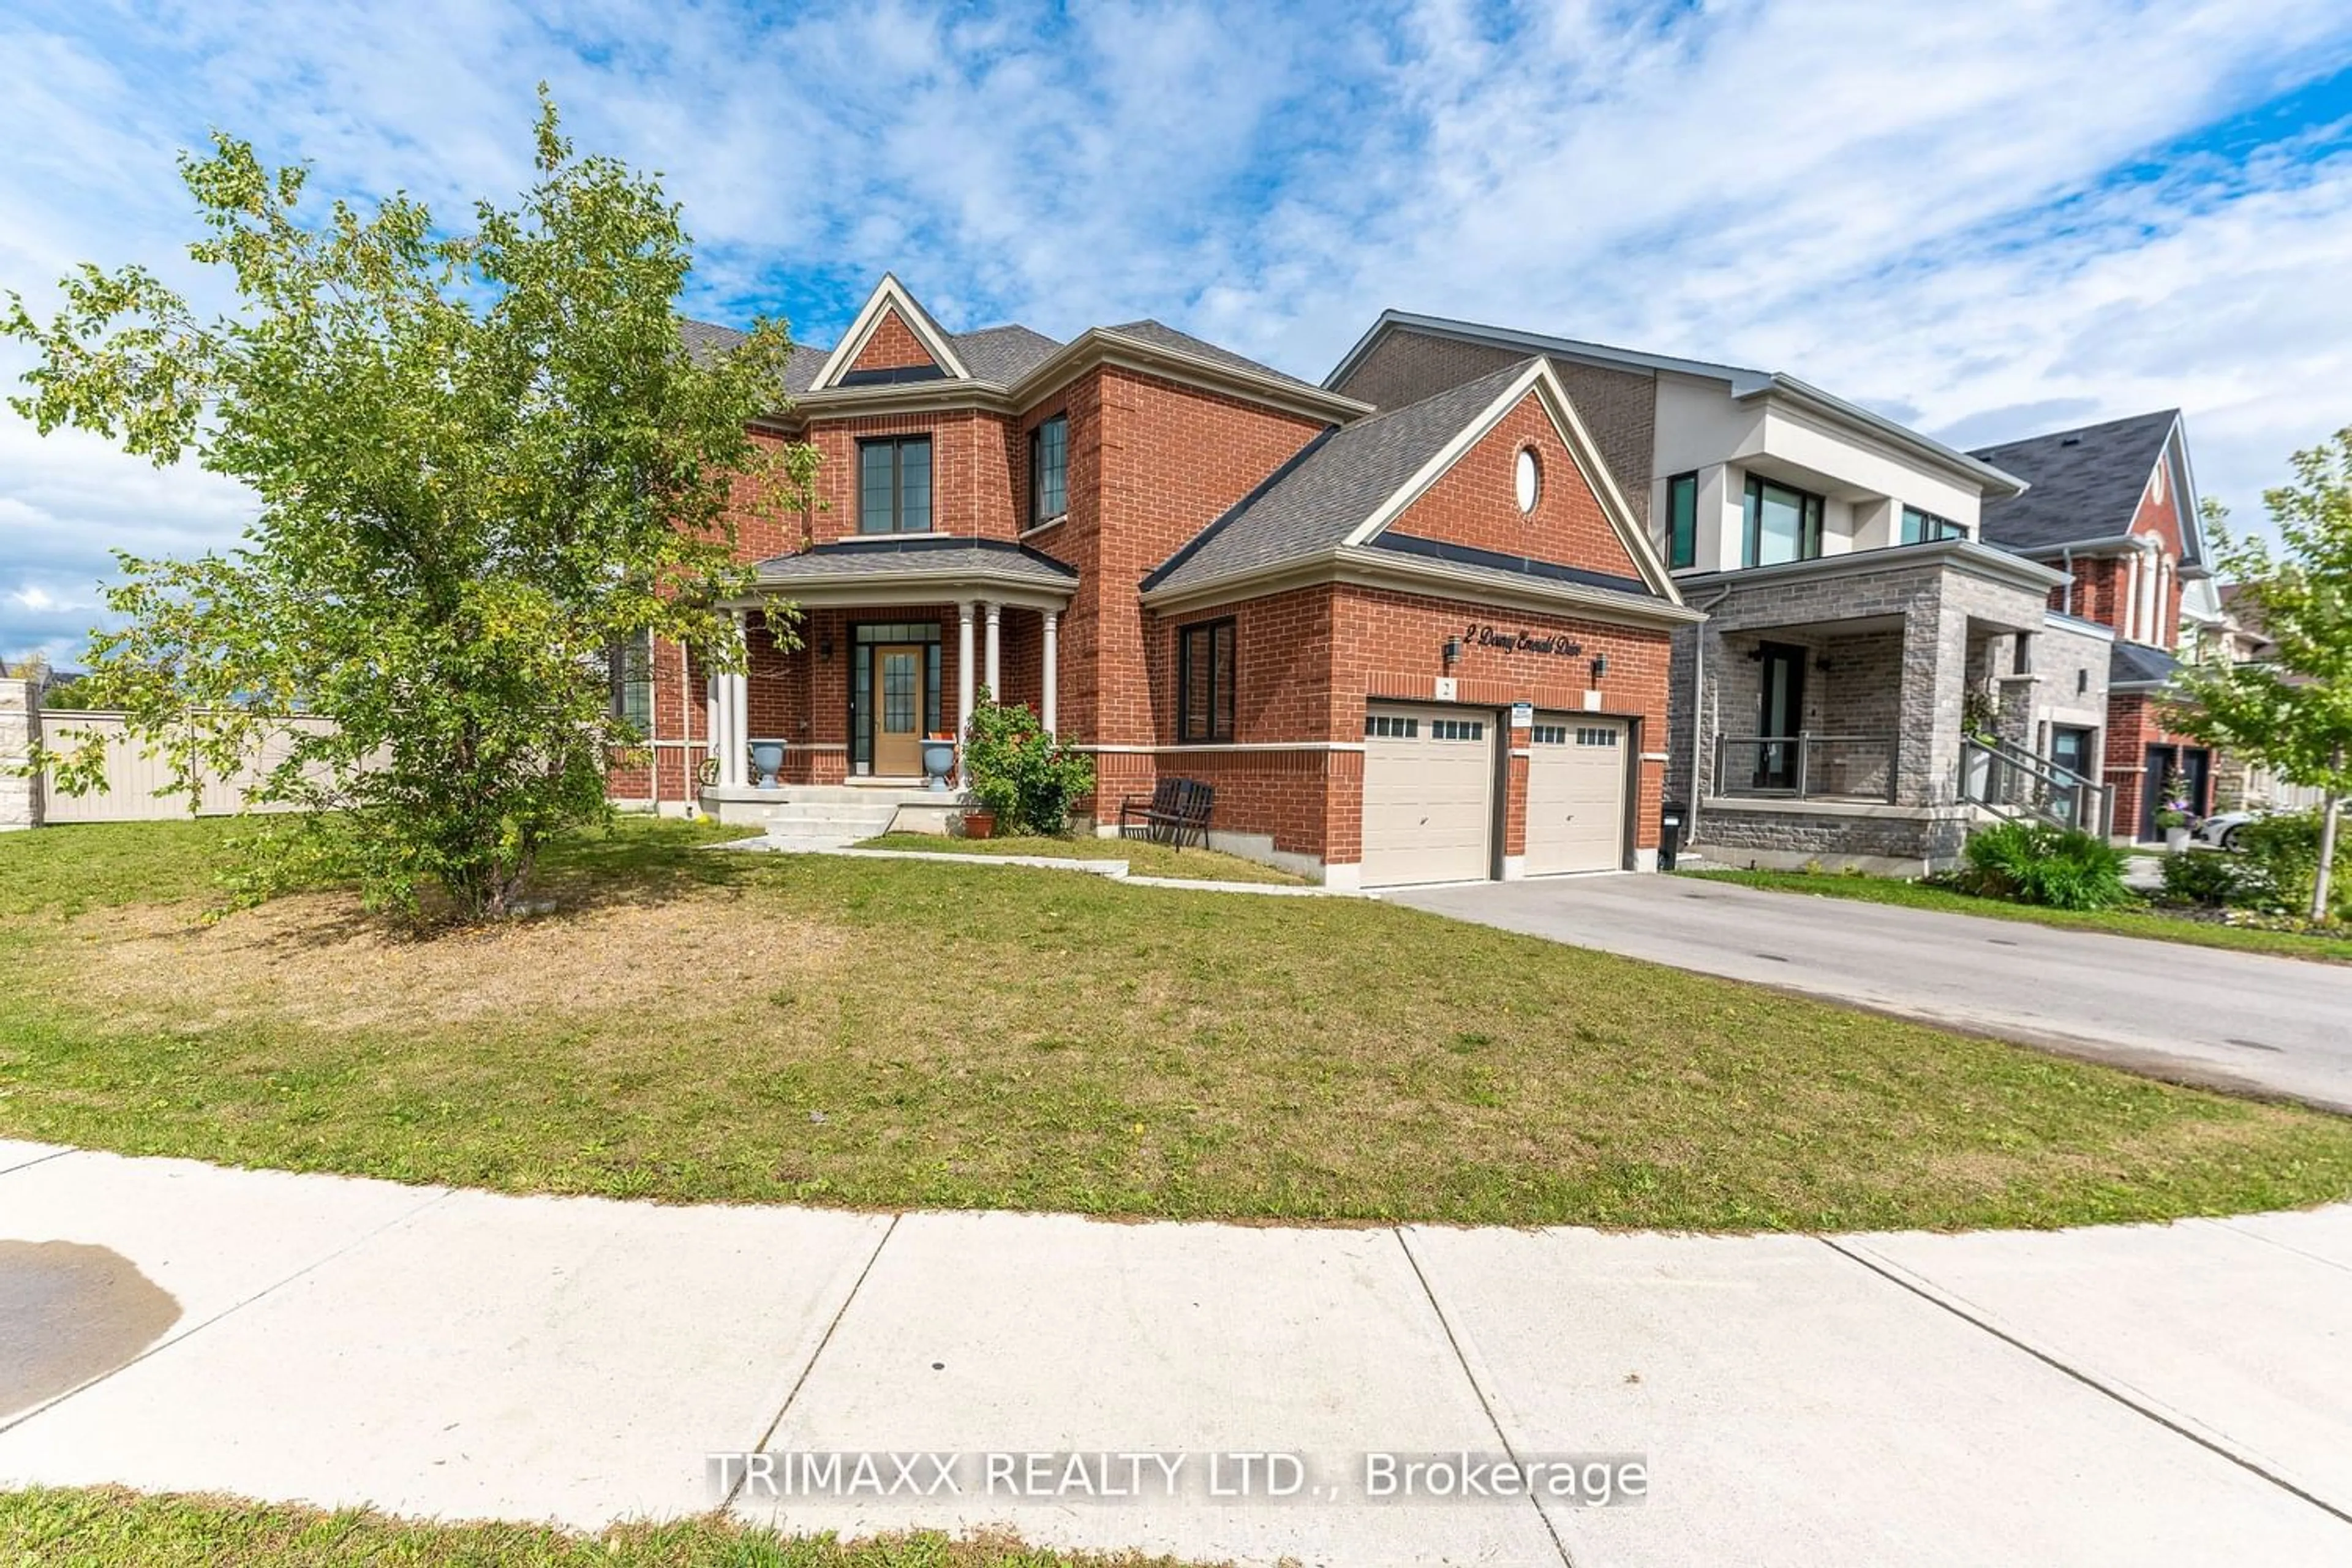 Home with brick exterior material for 2 Downy Emerald Dr, Bradford West Gwillimbury Ontario L3Z 0C1